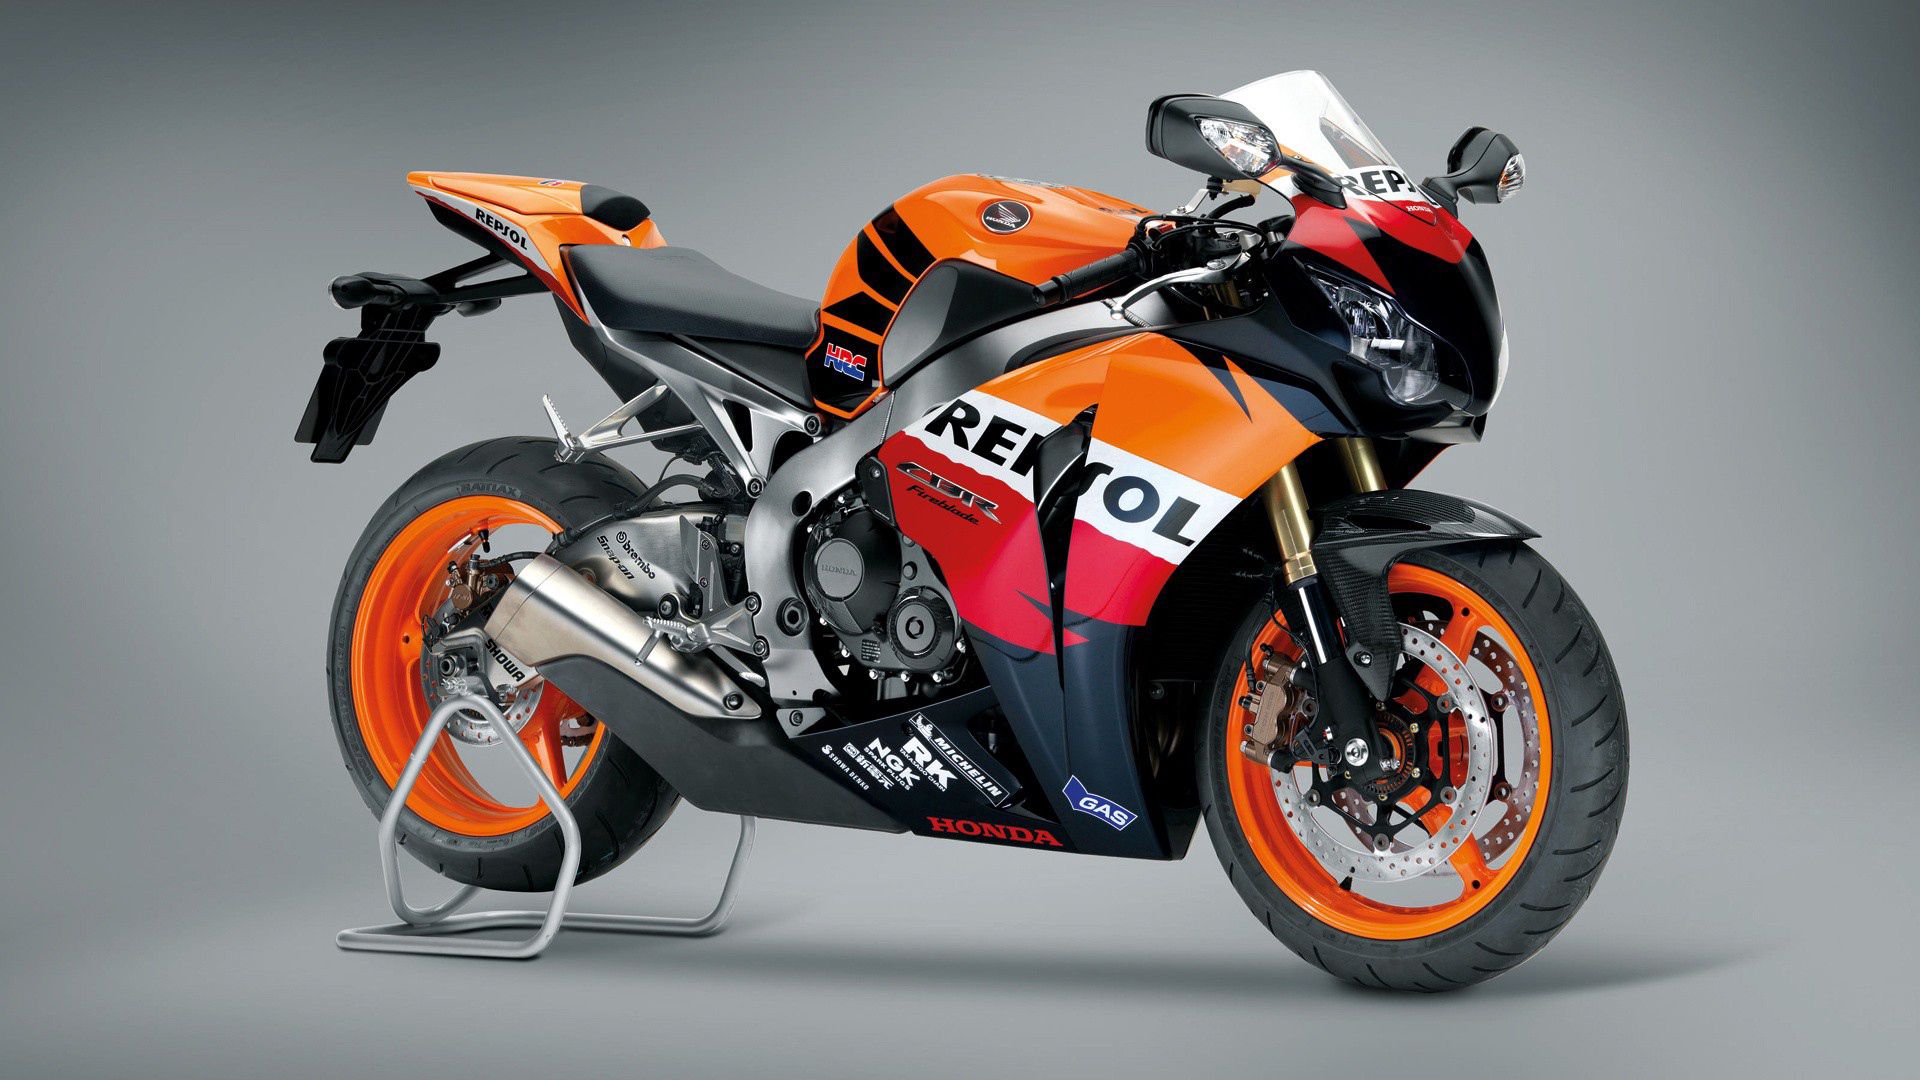 honda, motorcycles, side view, motorcycle, repsol cellphone